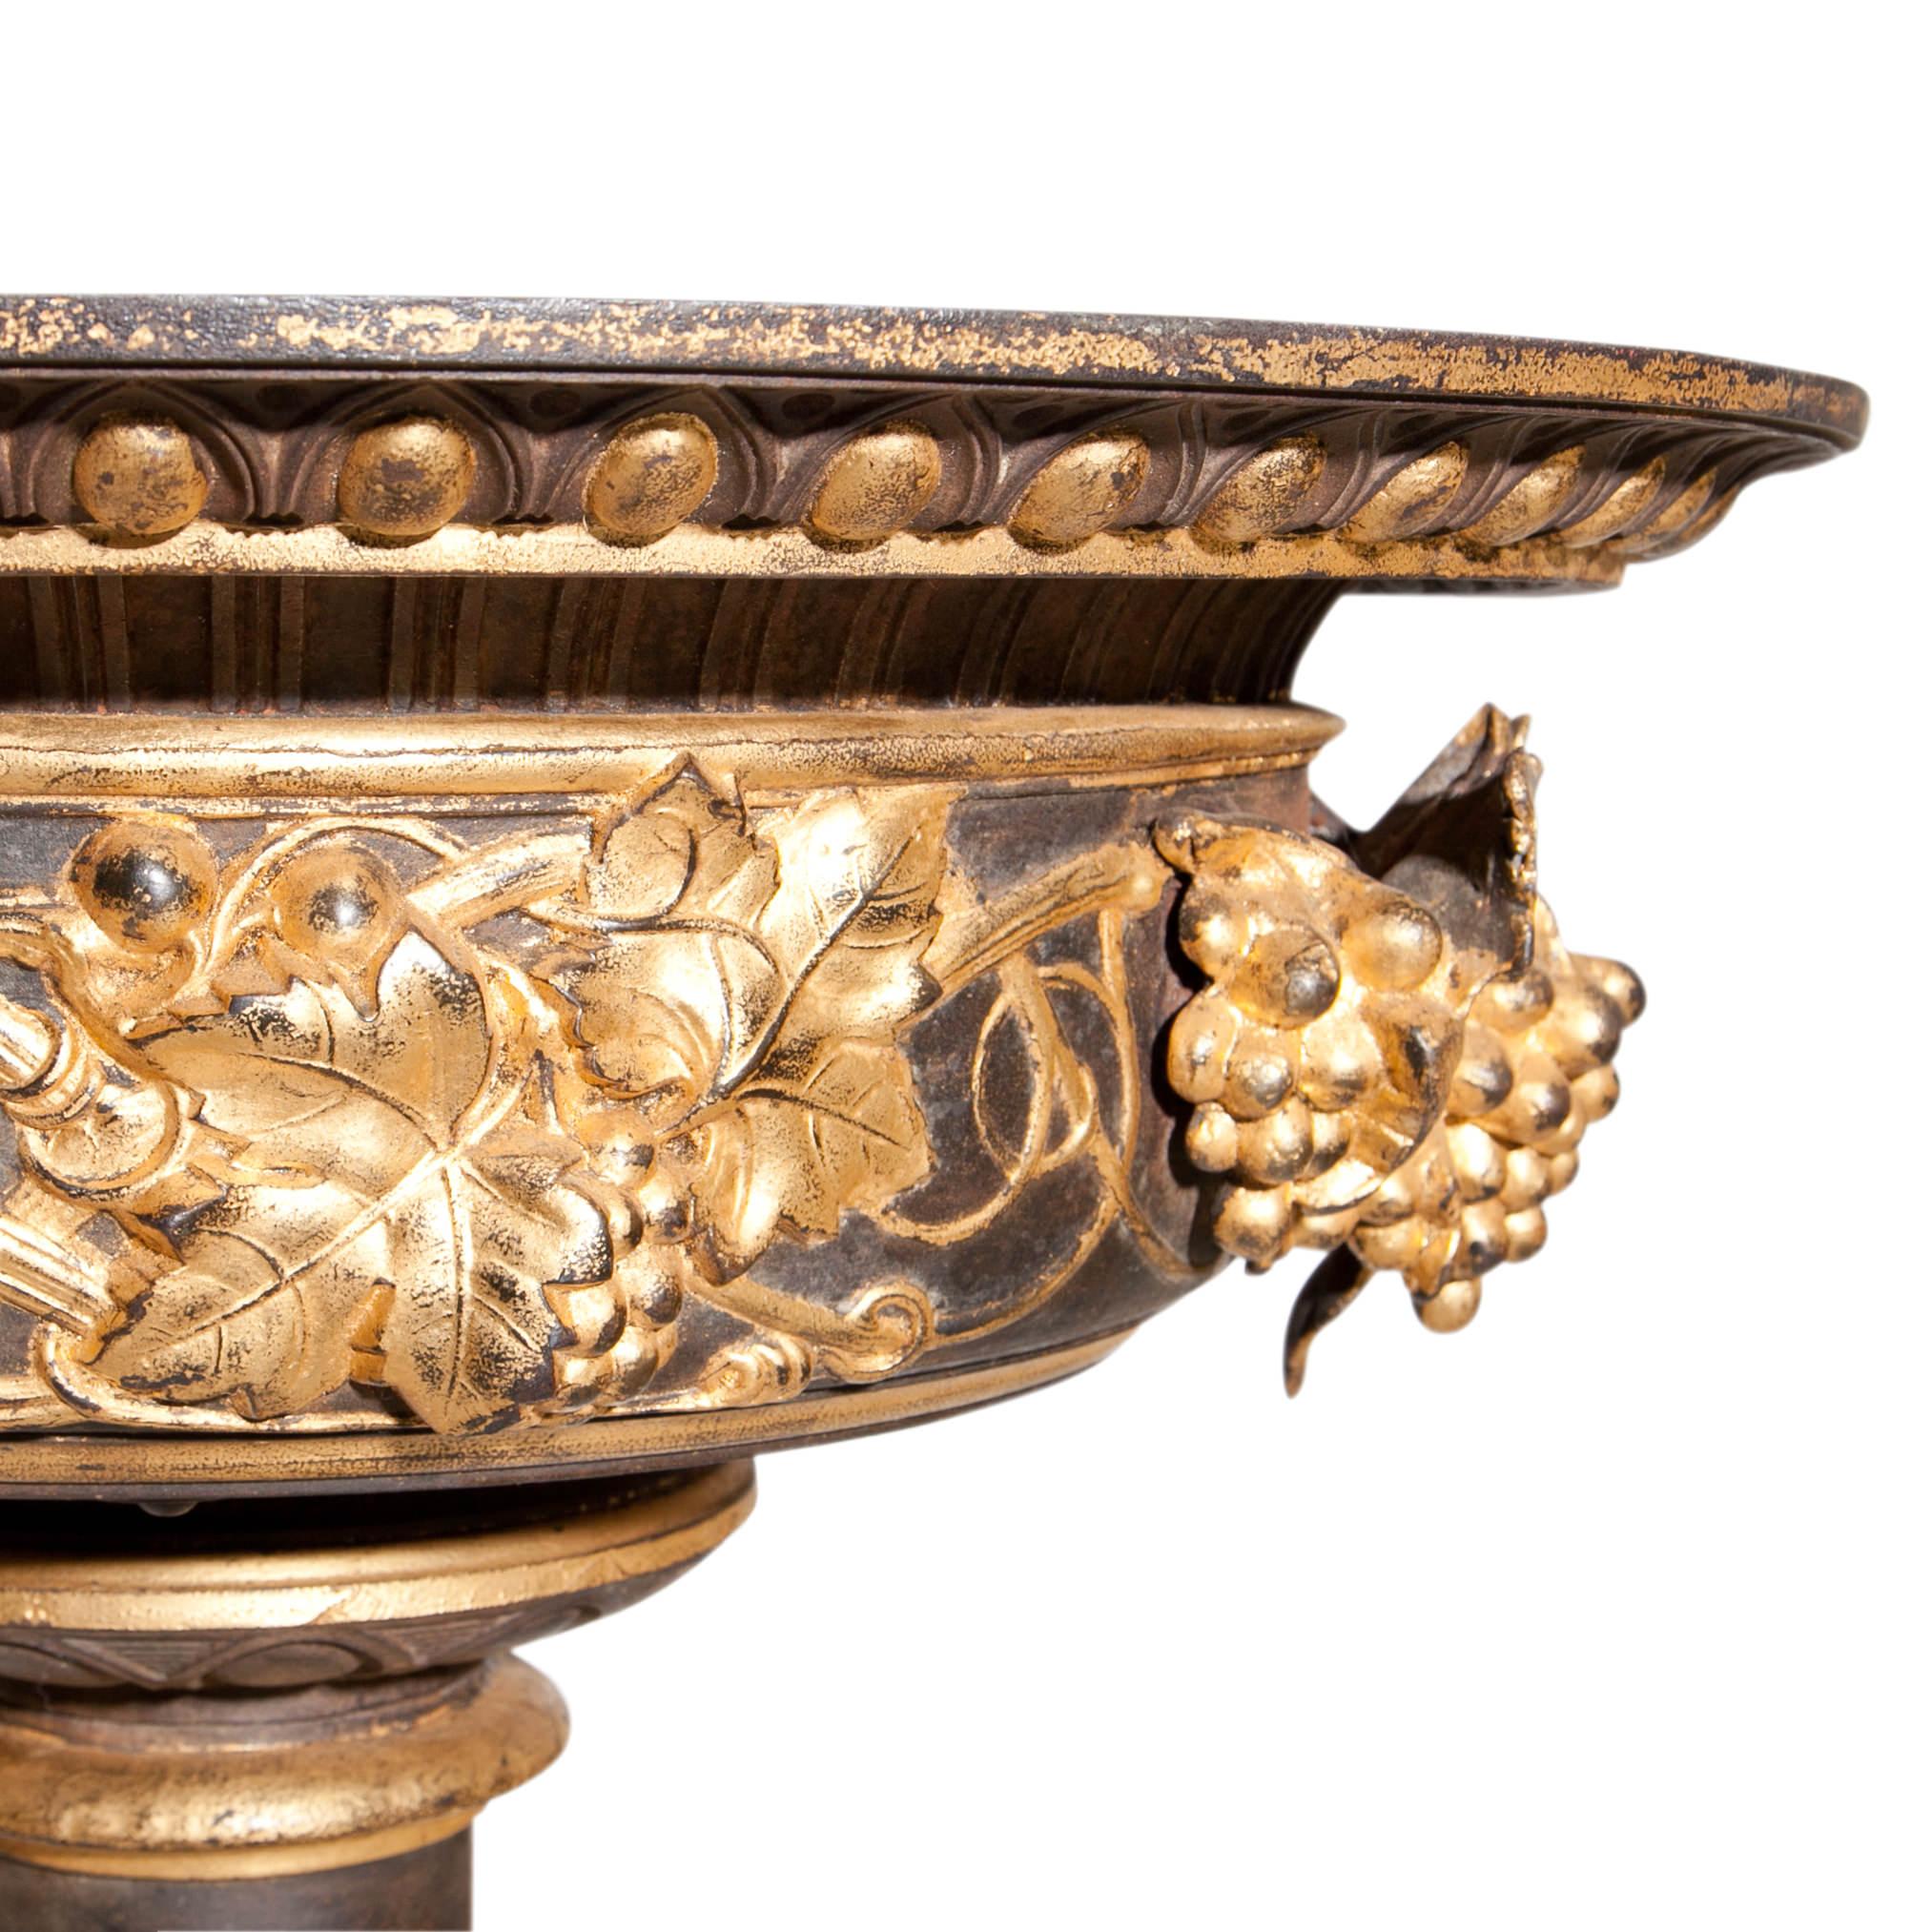 Large cast iron jardinière on a round stand with a square plinth, decorated with acanthus leaves. The basin is decorated with plastic grapes and vines in relief on the wall. Partly raised in gold.